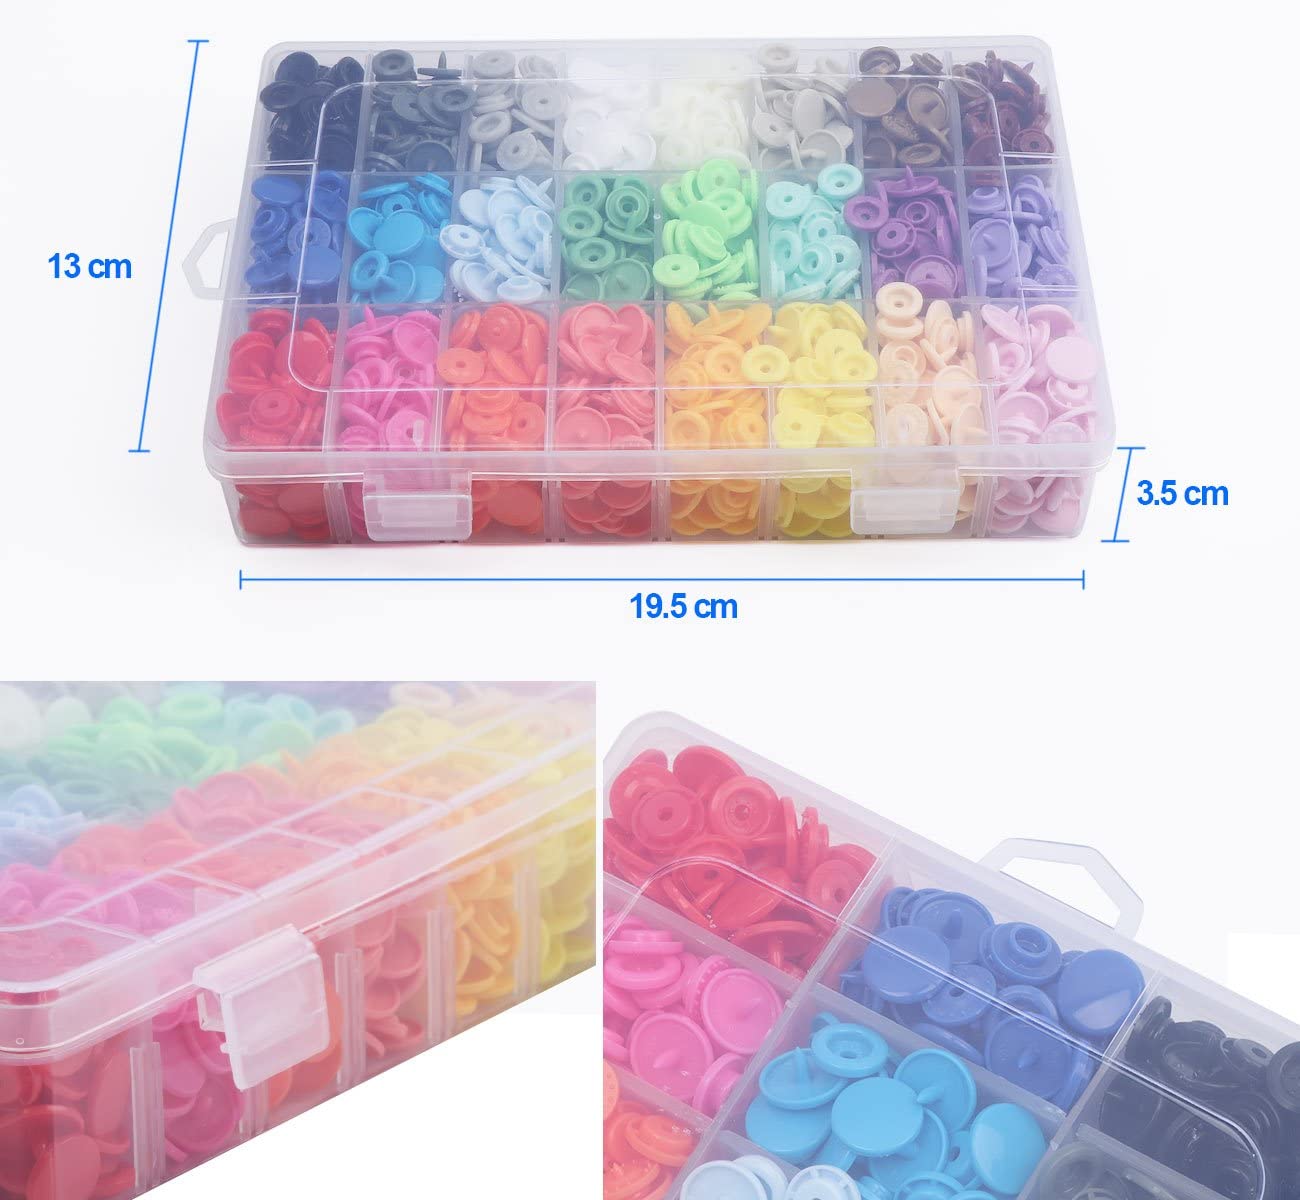 408 Sets Plastic Snap Buttons, No-Sew T5 Snaps with Organizer Storage Case for Bibs Diapers Crafts by ilauke - (For 8 piece(s))